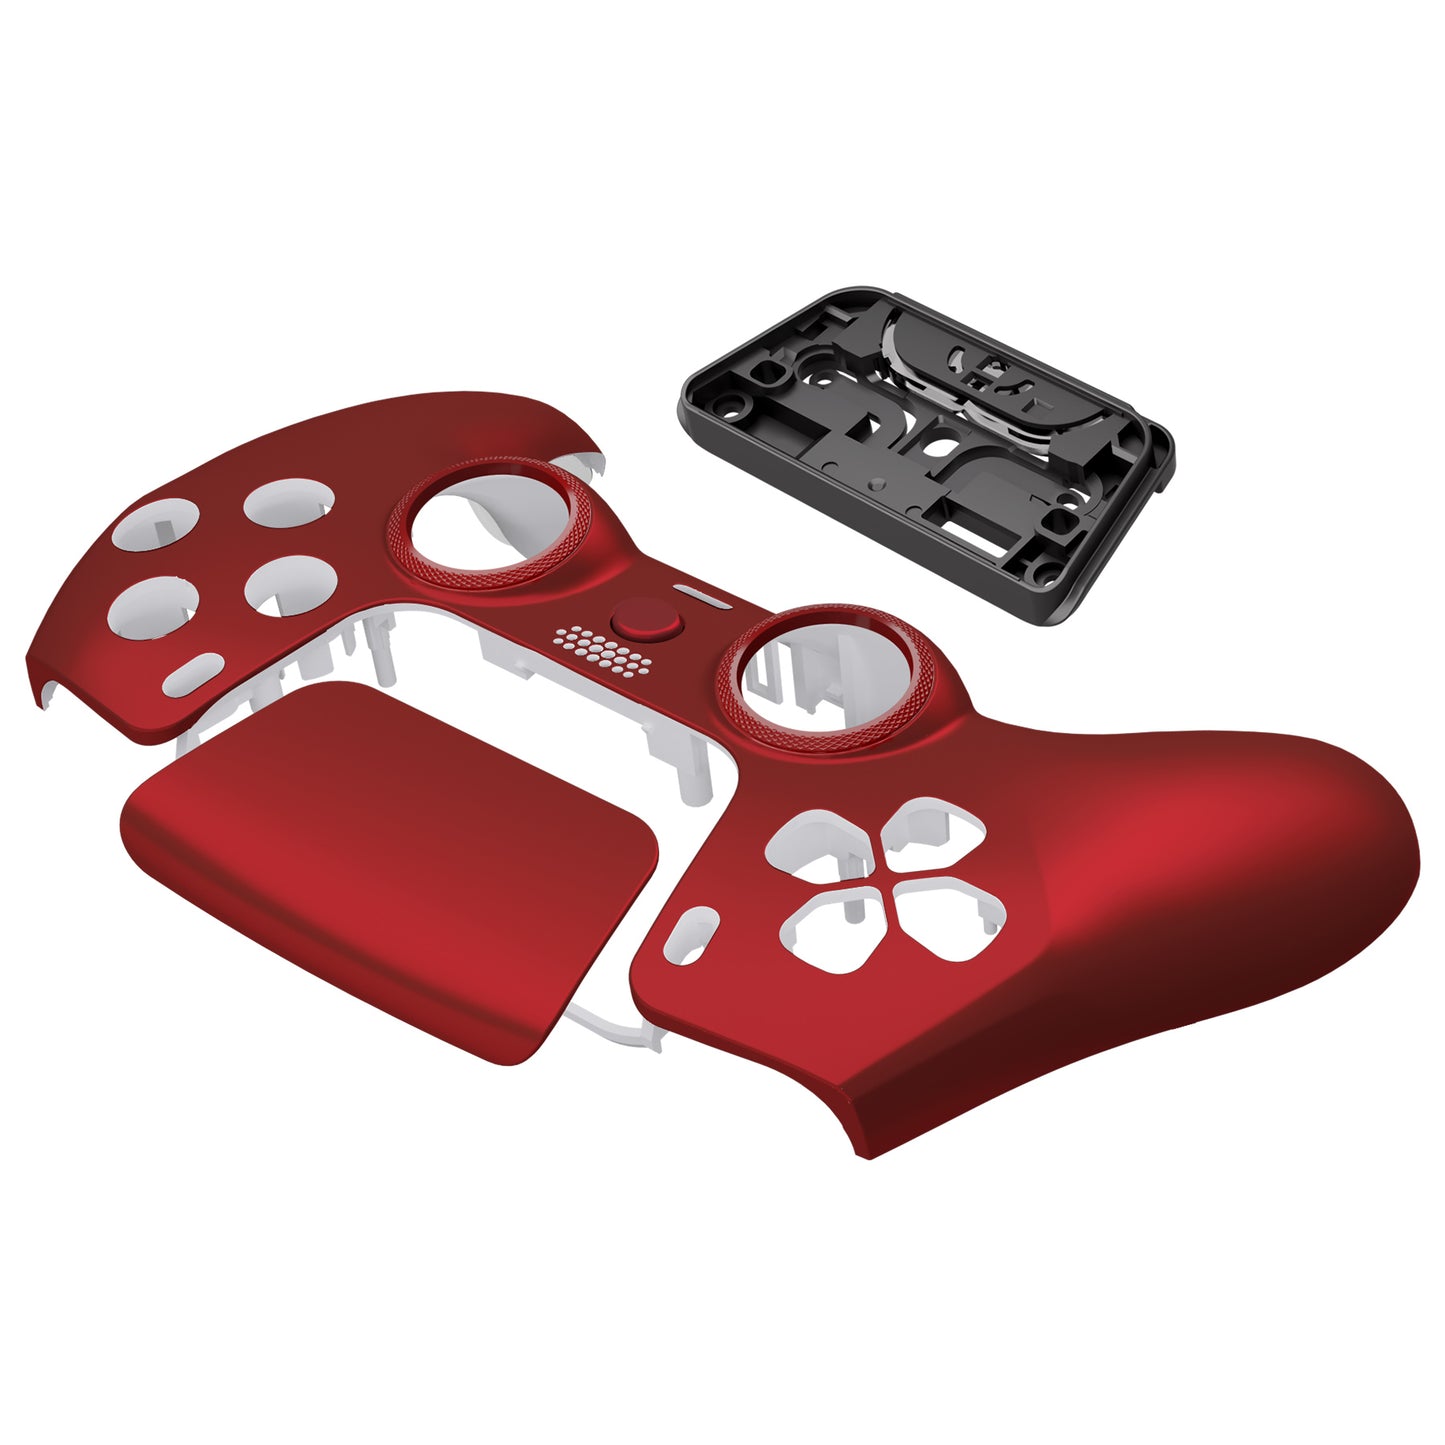 eXtremeRate Retail LUNA Redesigned Scarlet Red Soft Touch Front Shell Touchpad Compatible with ps5 Controller BDM-010 BDM-020 BDM-030, DIY Replacement Housing Custom Touch Pad Cover Compatible with ps5 Controller - GHPFP002